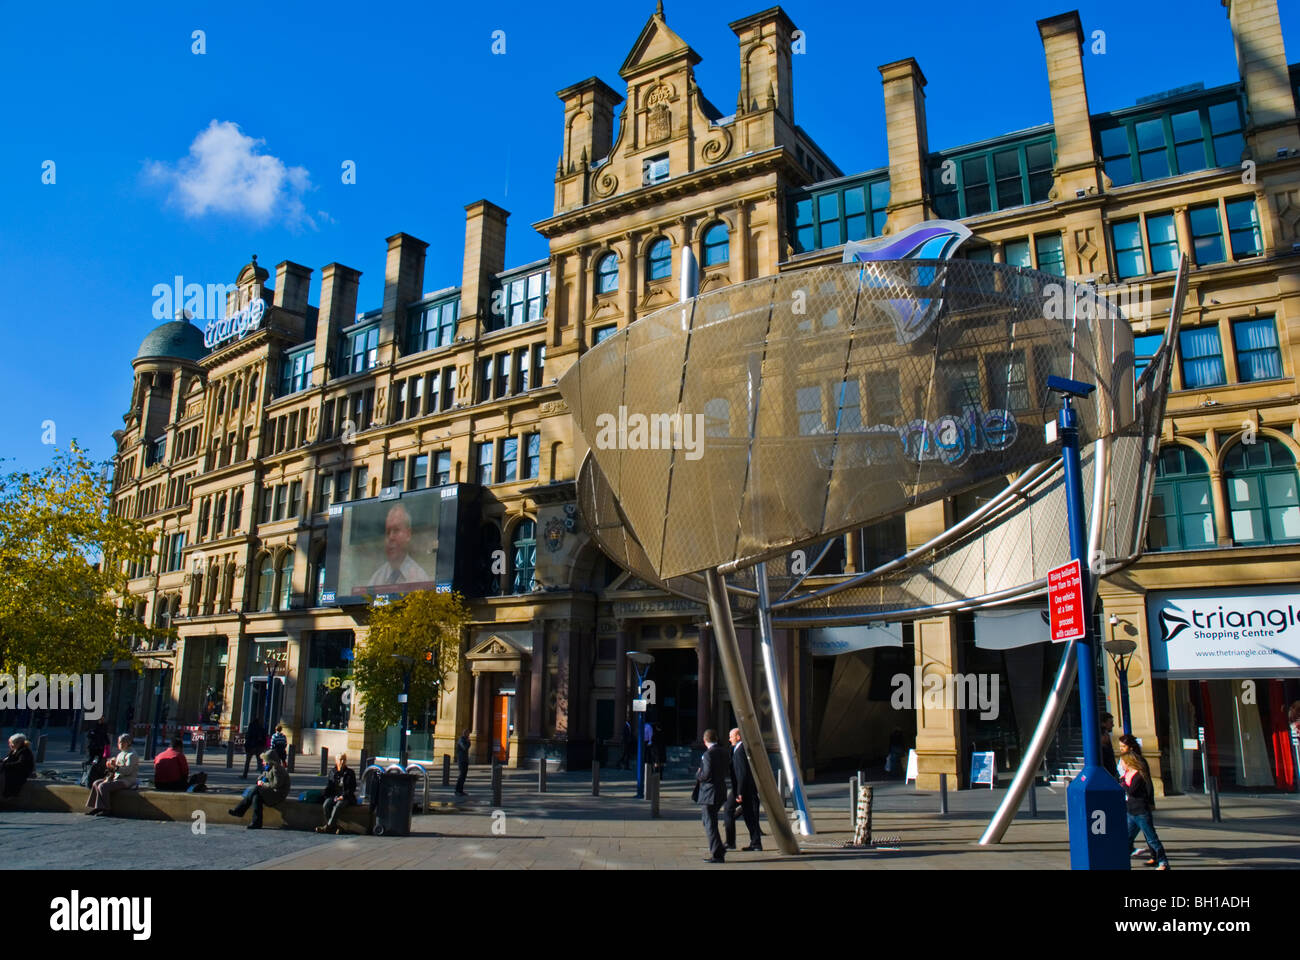 Triangle shopping centre exterior Cathedral Square central Manchester England UK Europe Stock Photo